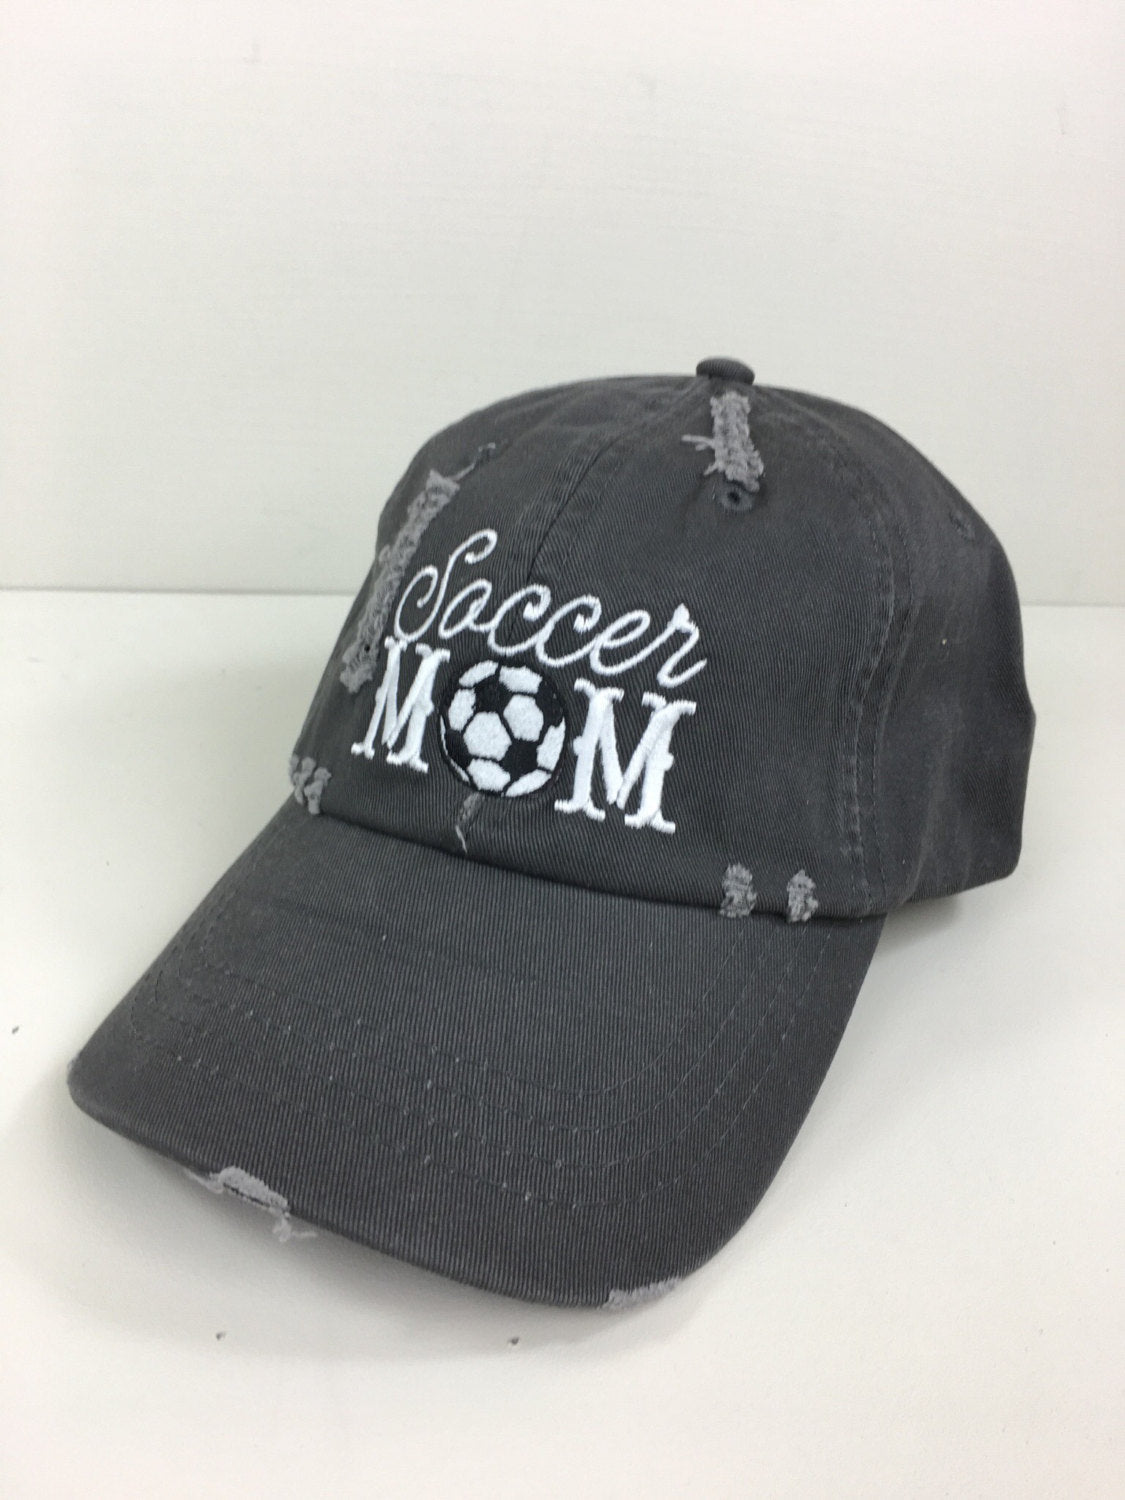 Soccer Mom Distressed Look Unstructured Hat